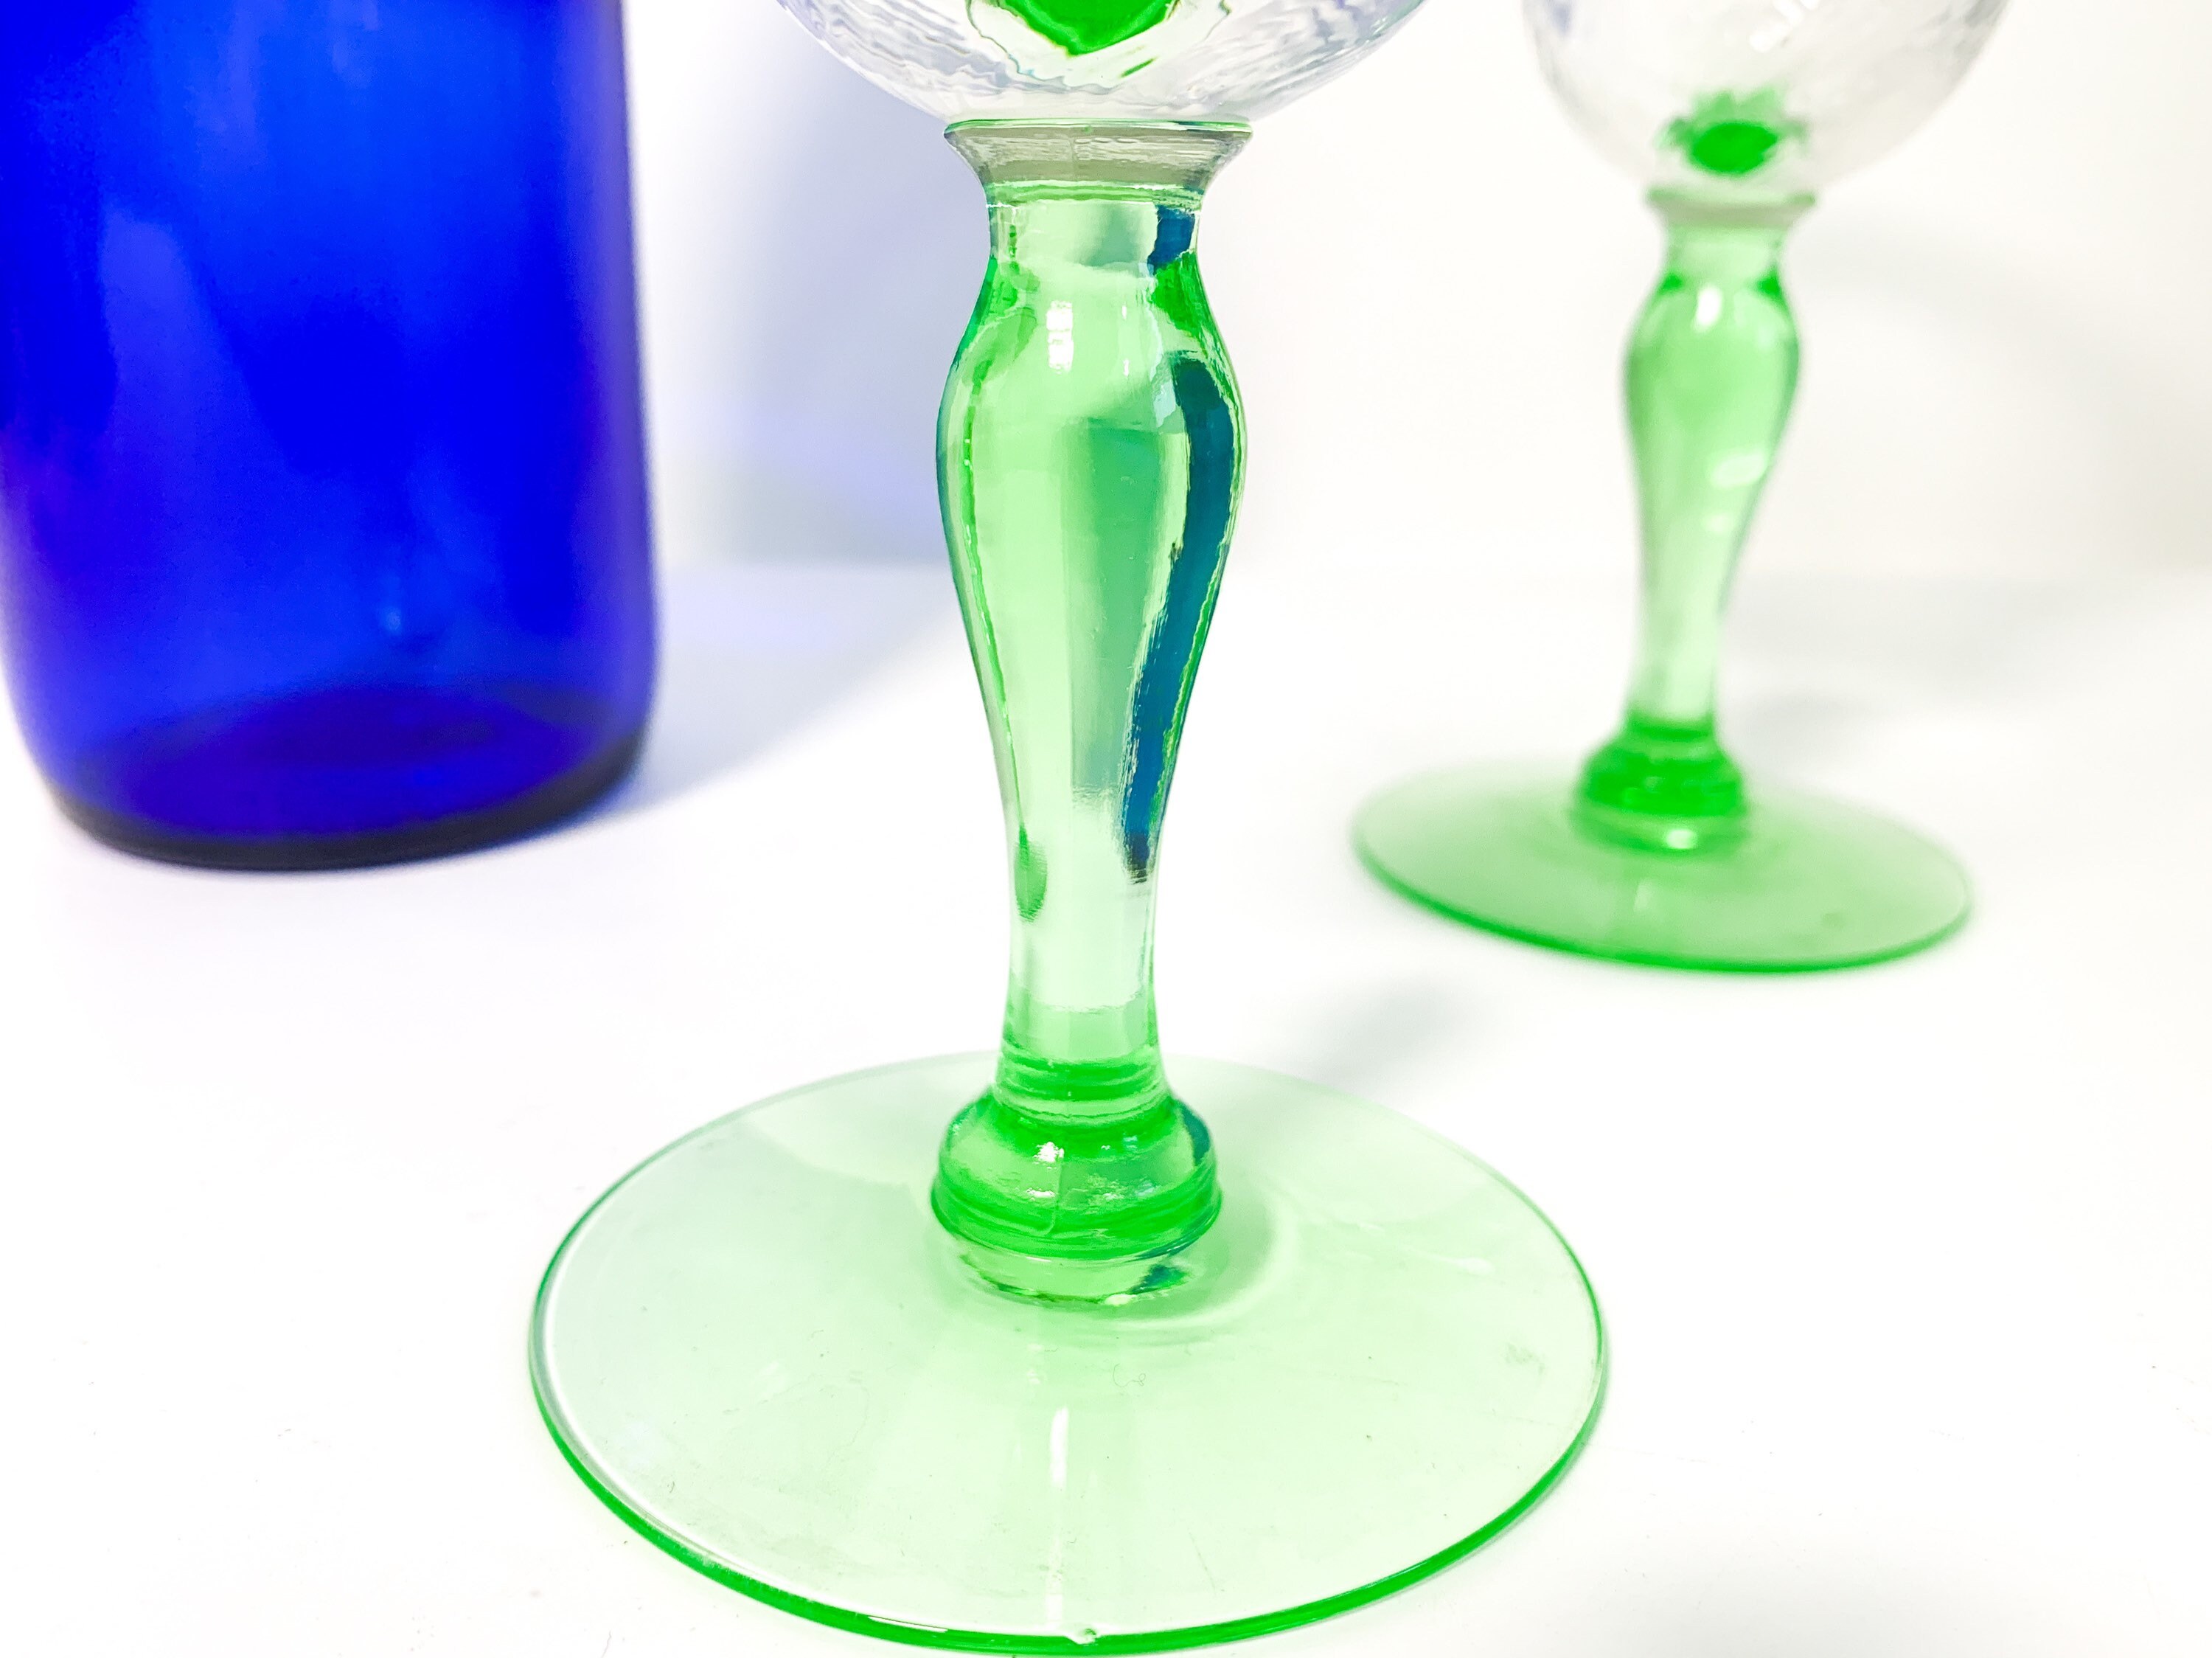 Vintage Pair of Large Green Glass Wine/water Glasses Goblets 